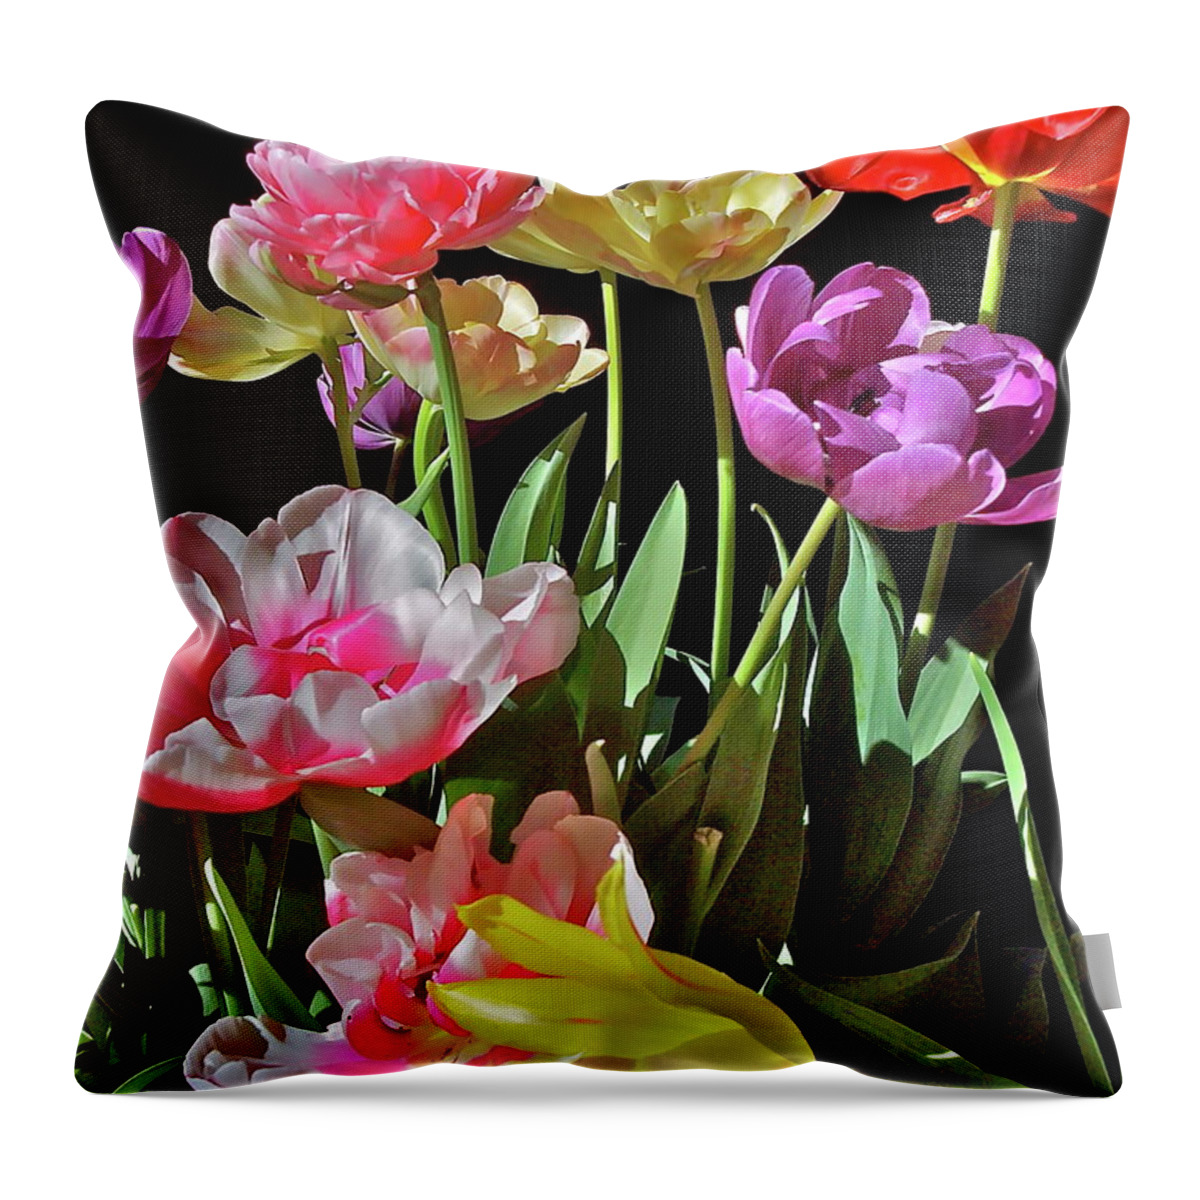 Flowers Throw Pillow featuring the photograph Tulip 8 by Pamela Cooper